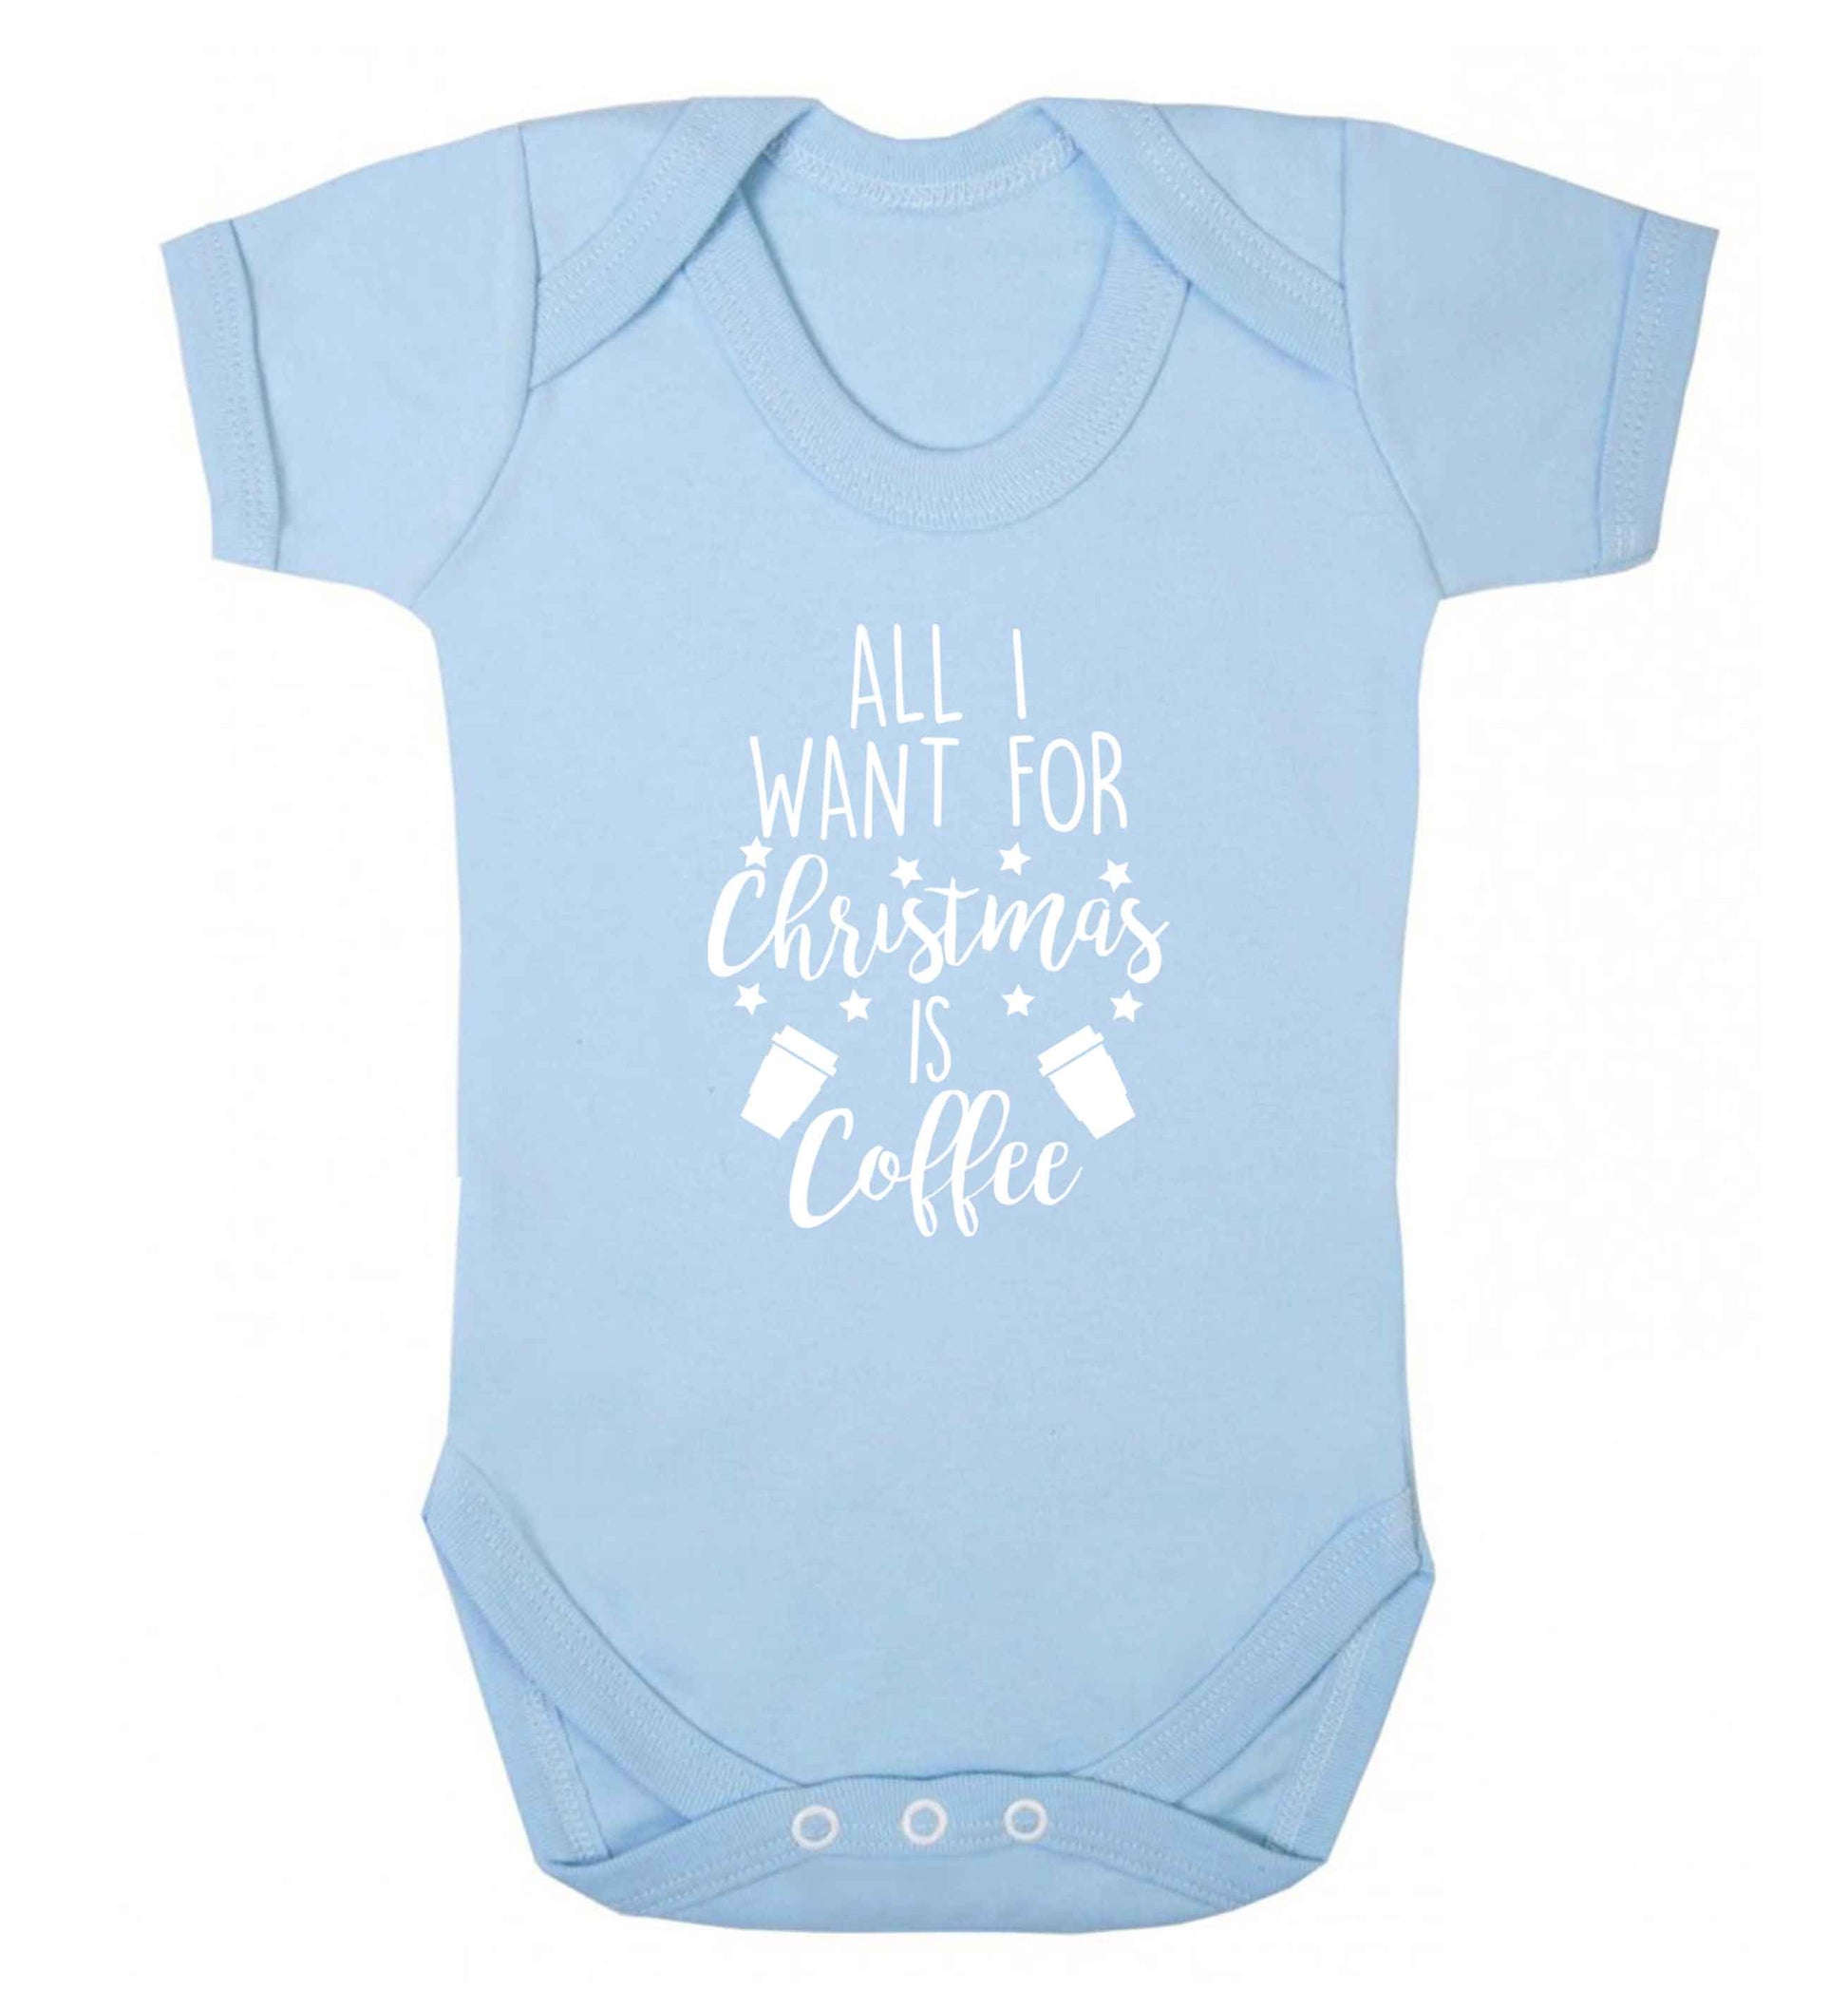 All I want for Christmas is coffee Baby Vest pale blue 18-24 months